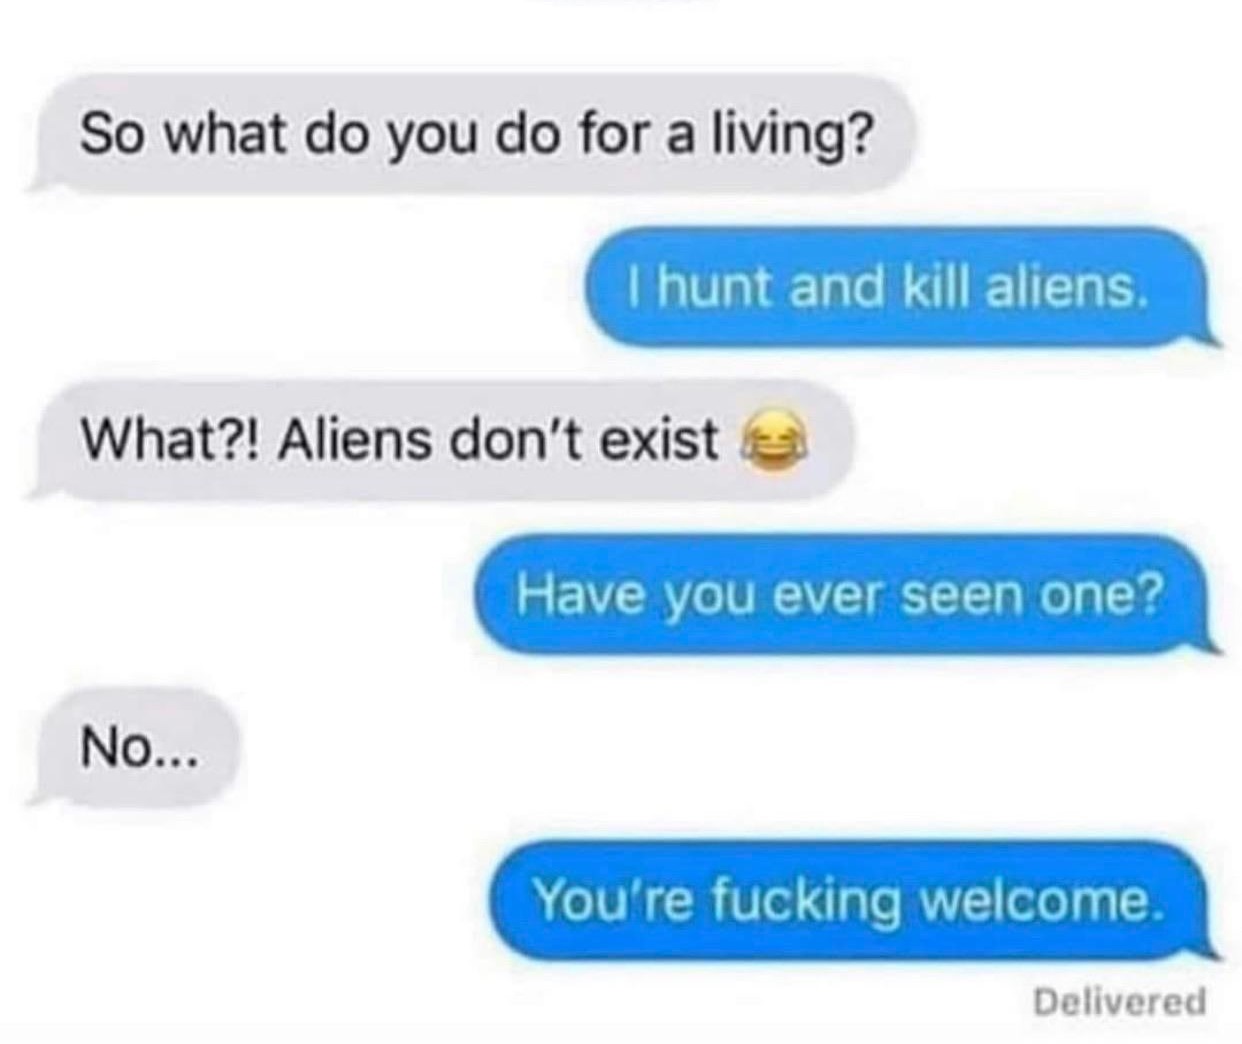 material - So what do you do for a living? I hunt and kill aliens. What?! Aliens don't exist Have you ever seen one? No... You're fucking welcome. Delivered